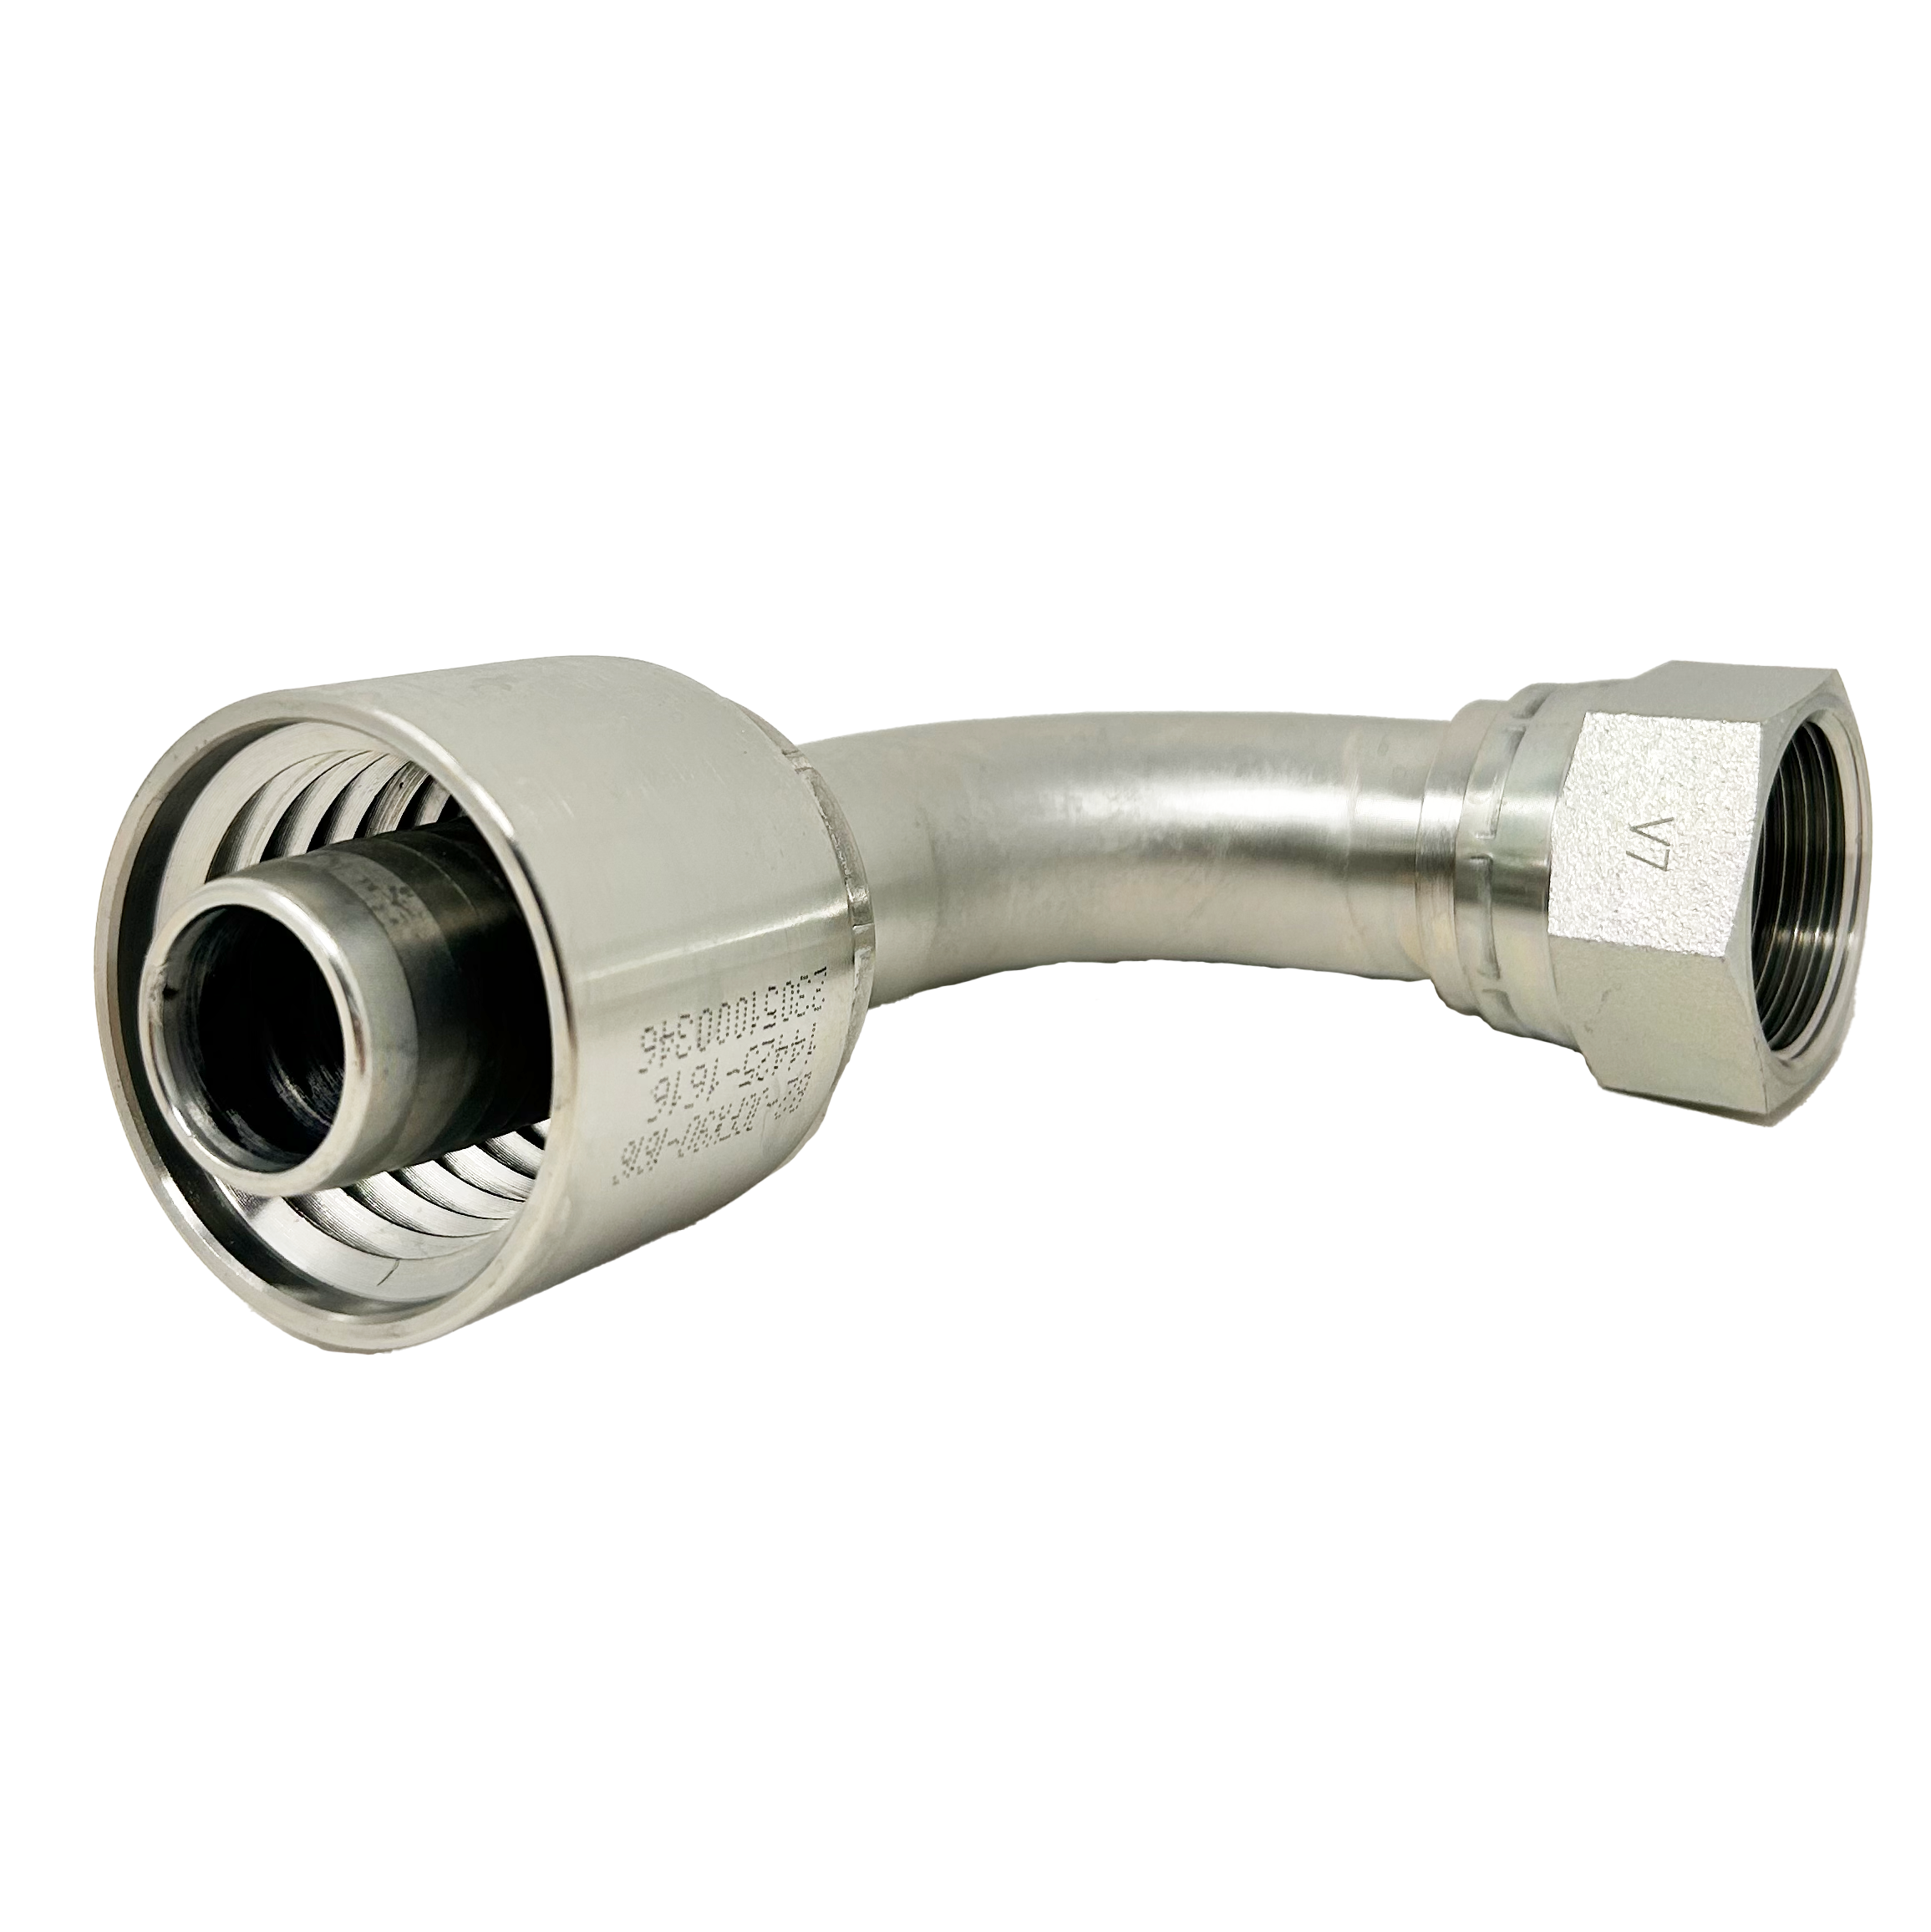 B2-JCFX90-1212: Continental Hose Fitting, 0.75 (3/4") Hose ID x 1-1/16-12 Female JIC, 90-Degree Swivel Connection